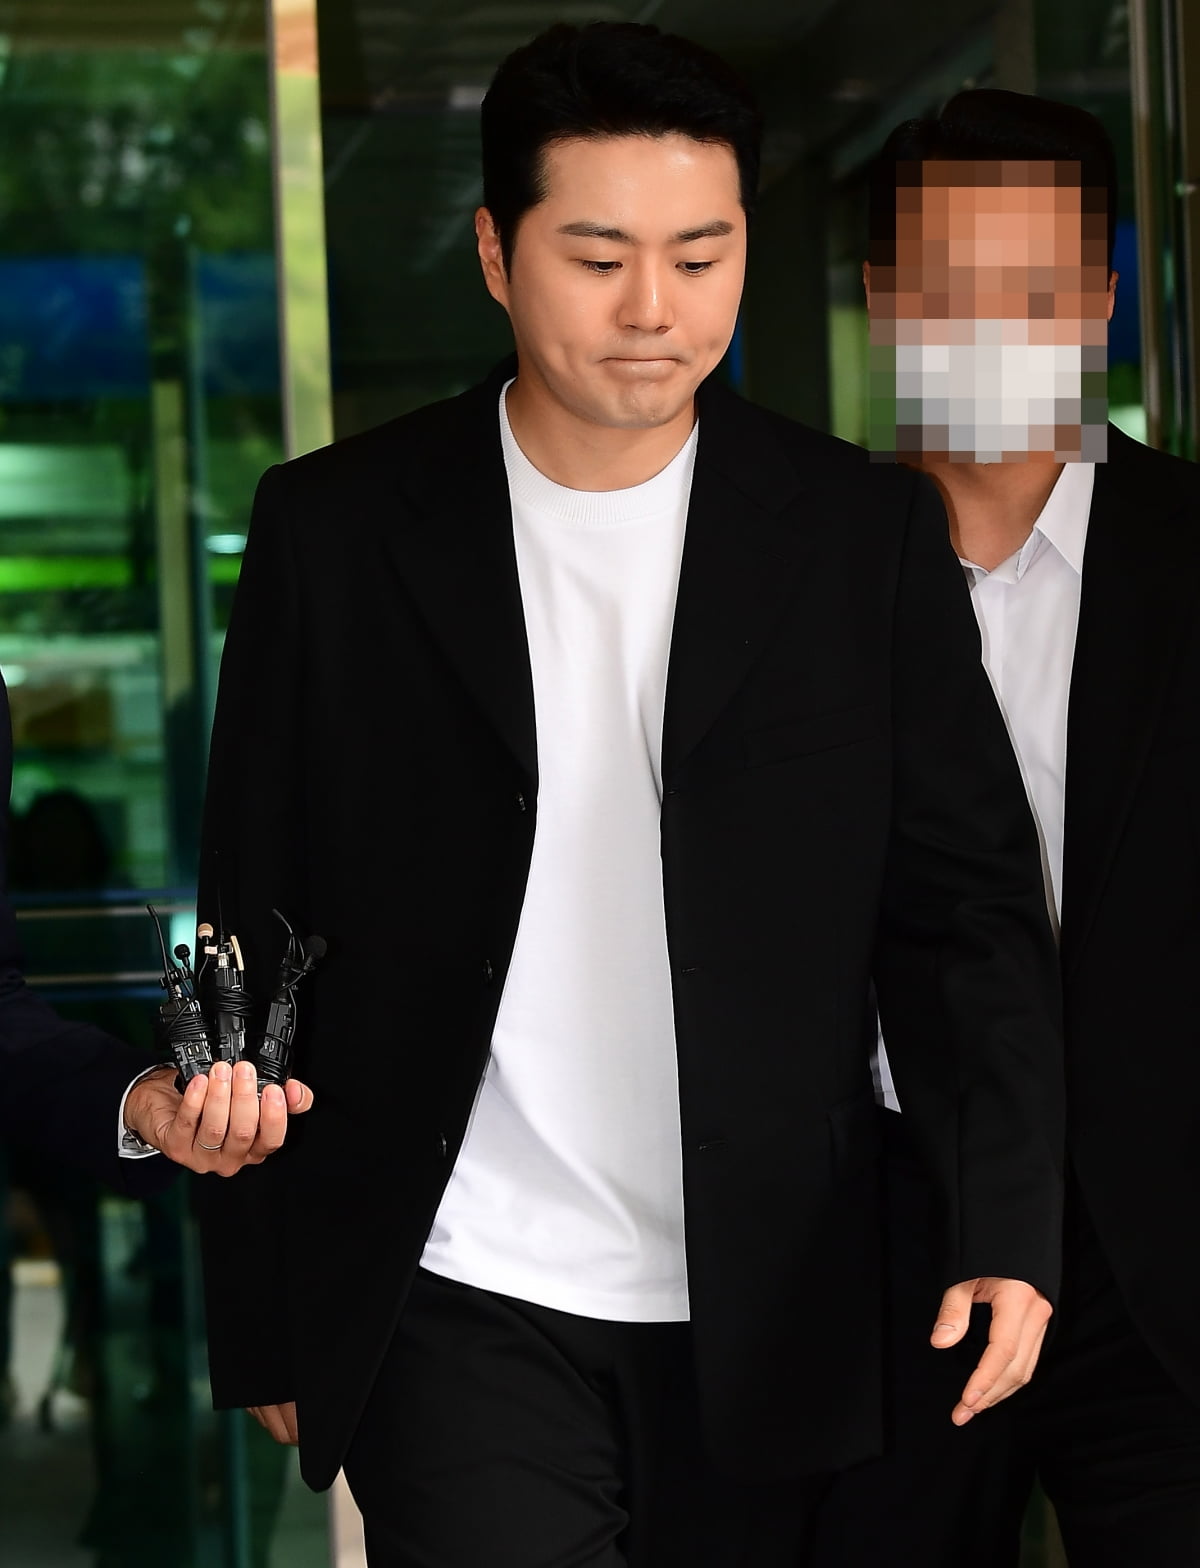 Eru, first trial of appeal today (7th)... Charges of drunk driving and tampering